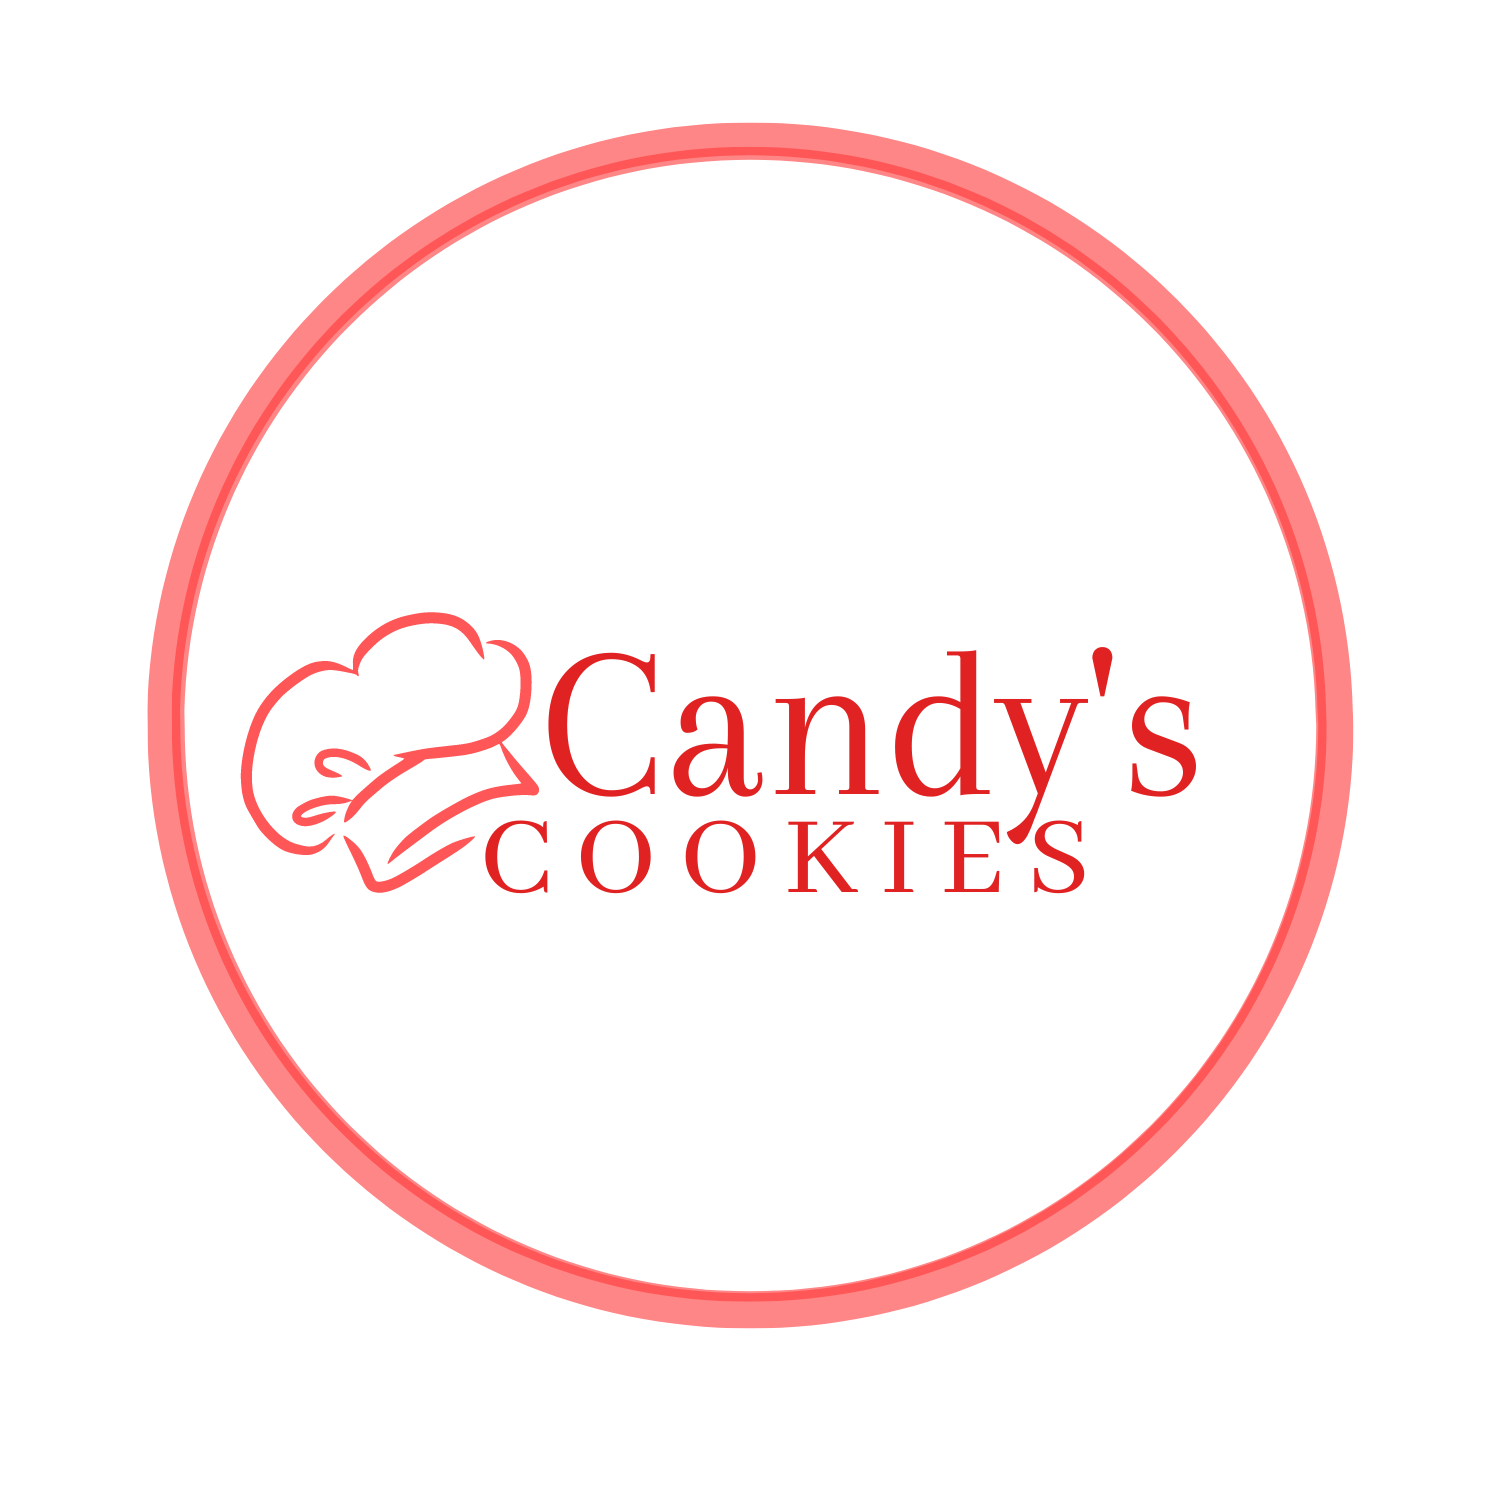 Candys Cookies